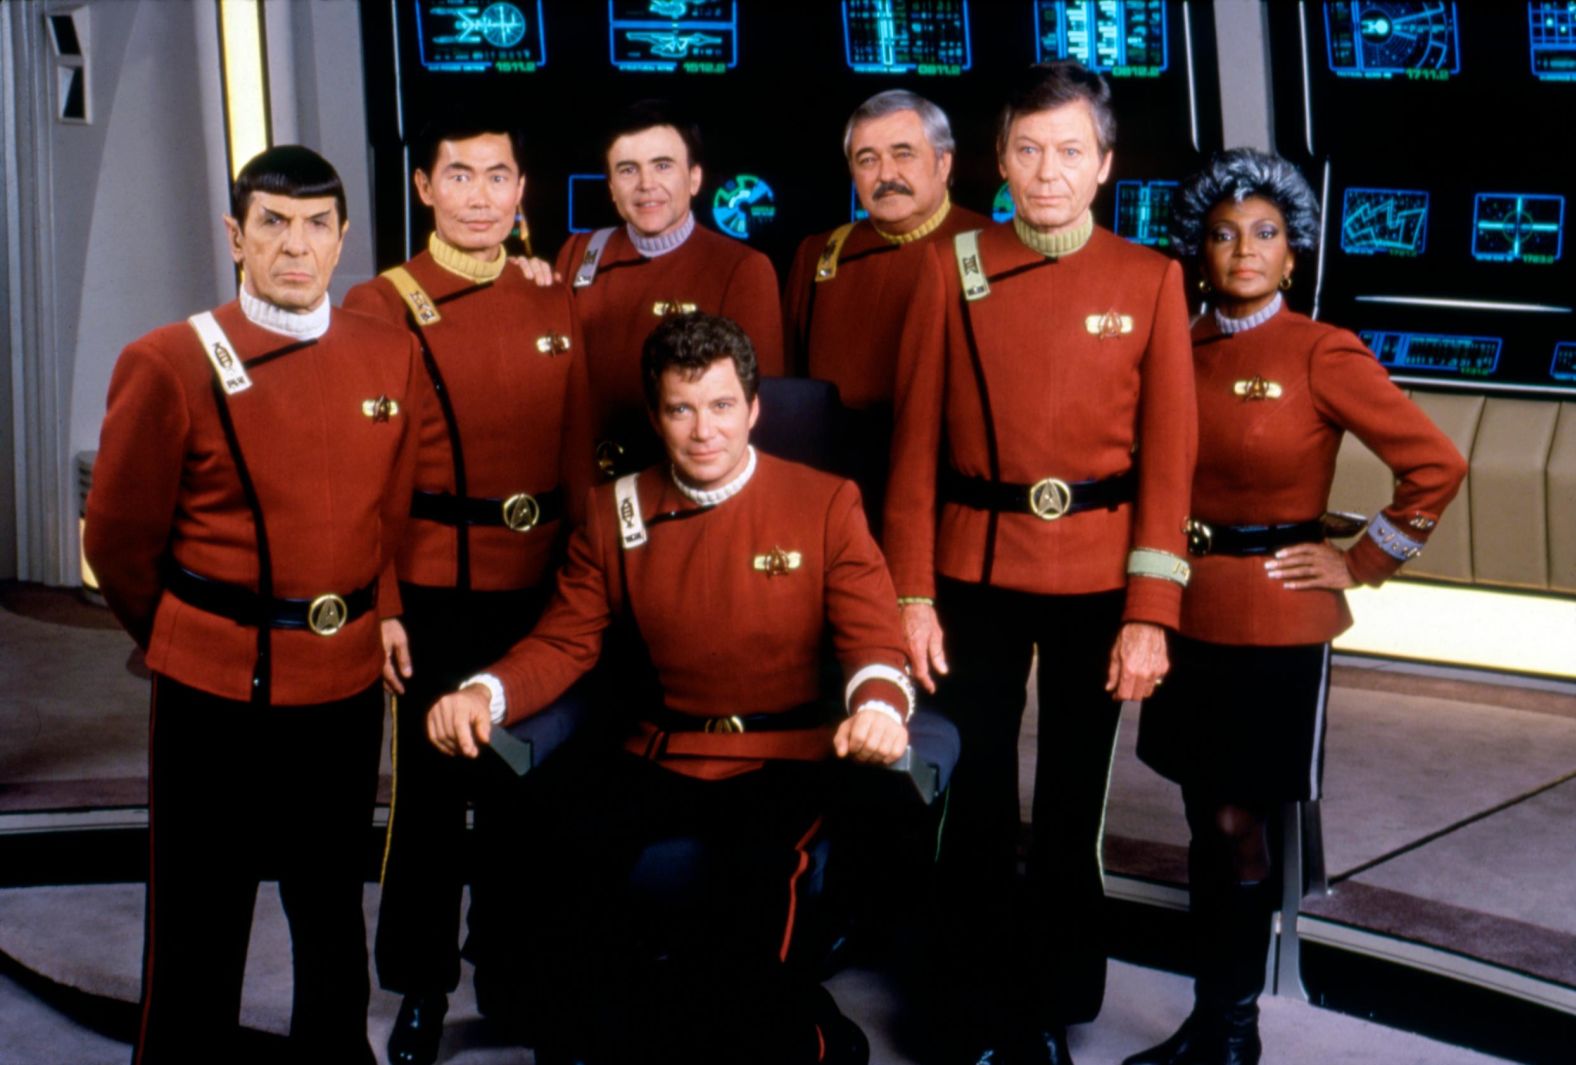 Shatner is flanked by his co-stars on the set of the 1989 film "Star Trek V: The Final Frontier." Shatner also directed the movie.